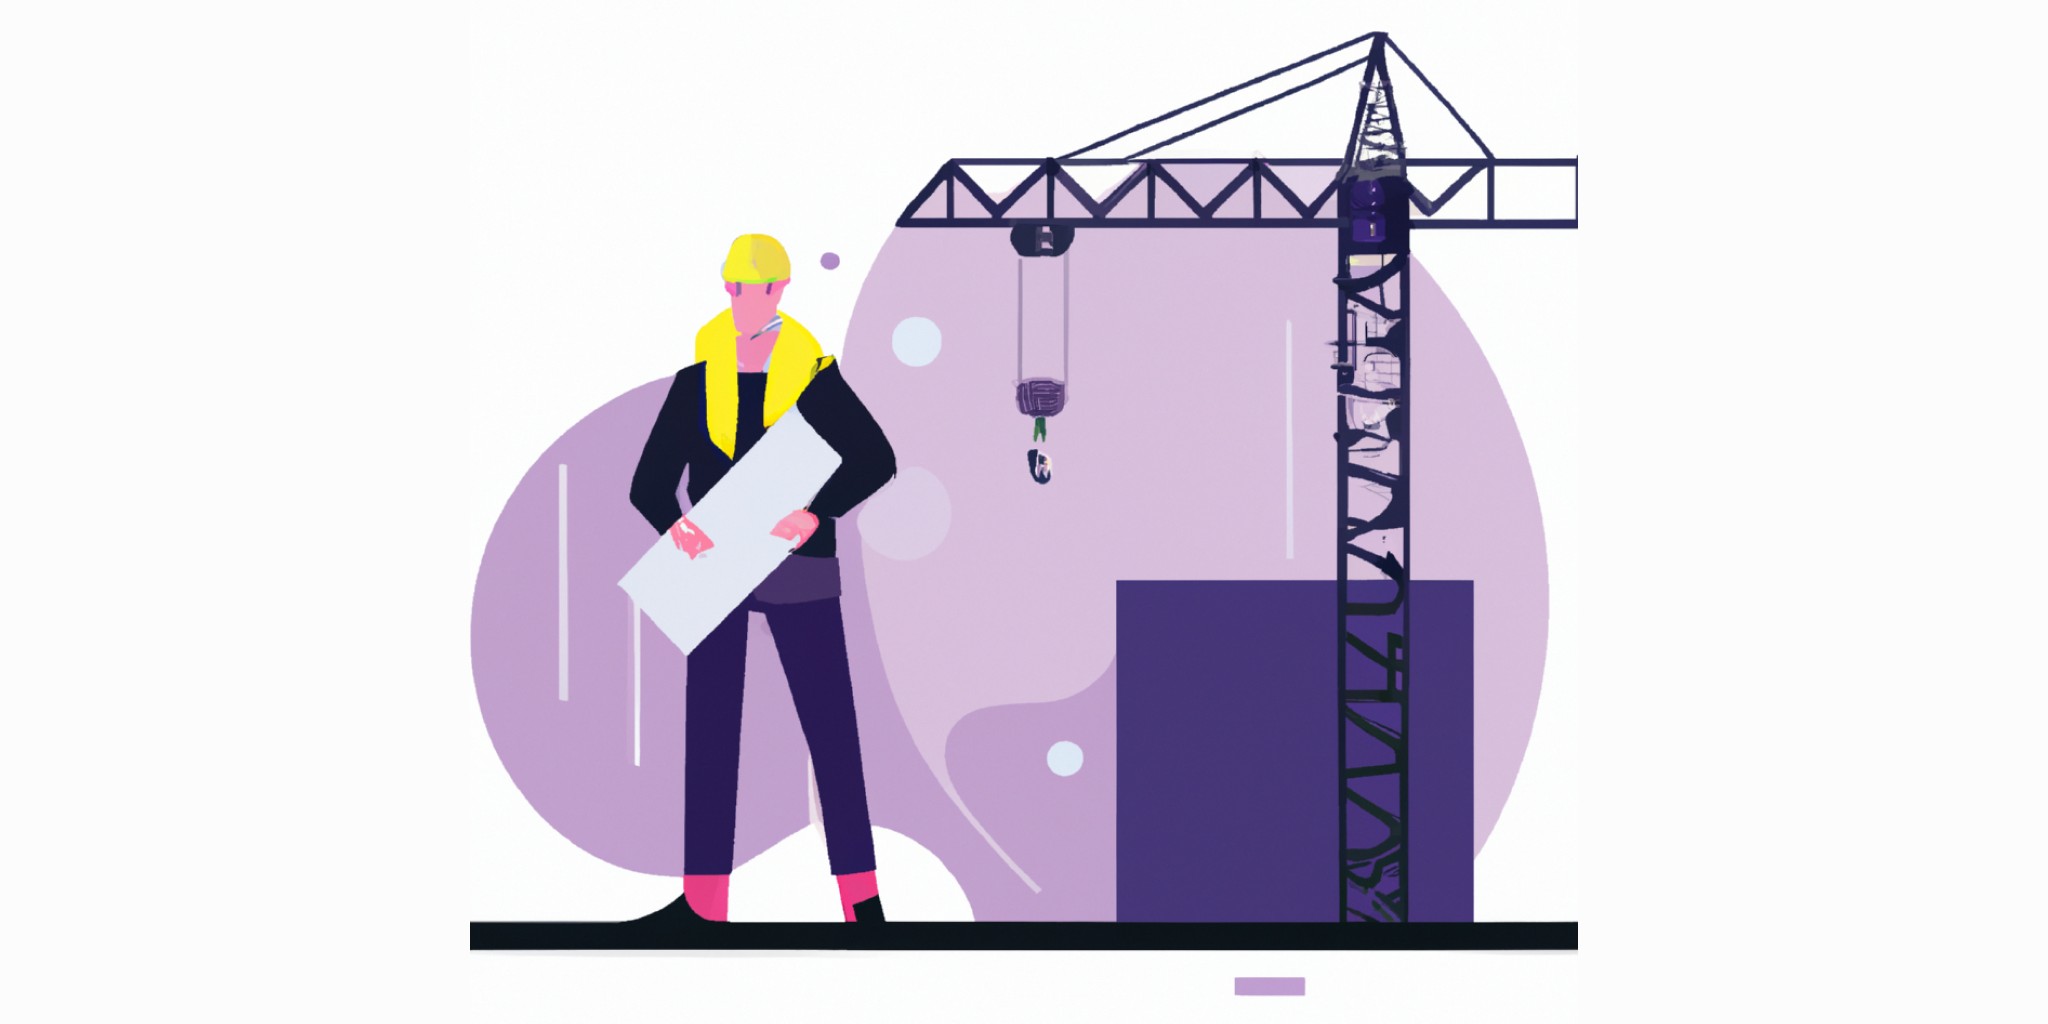 builder with a helmet and crane in flat illustration style with gradients and white background